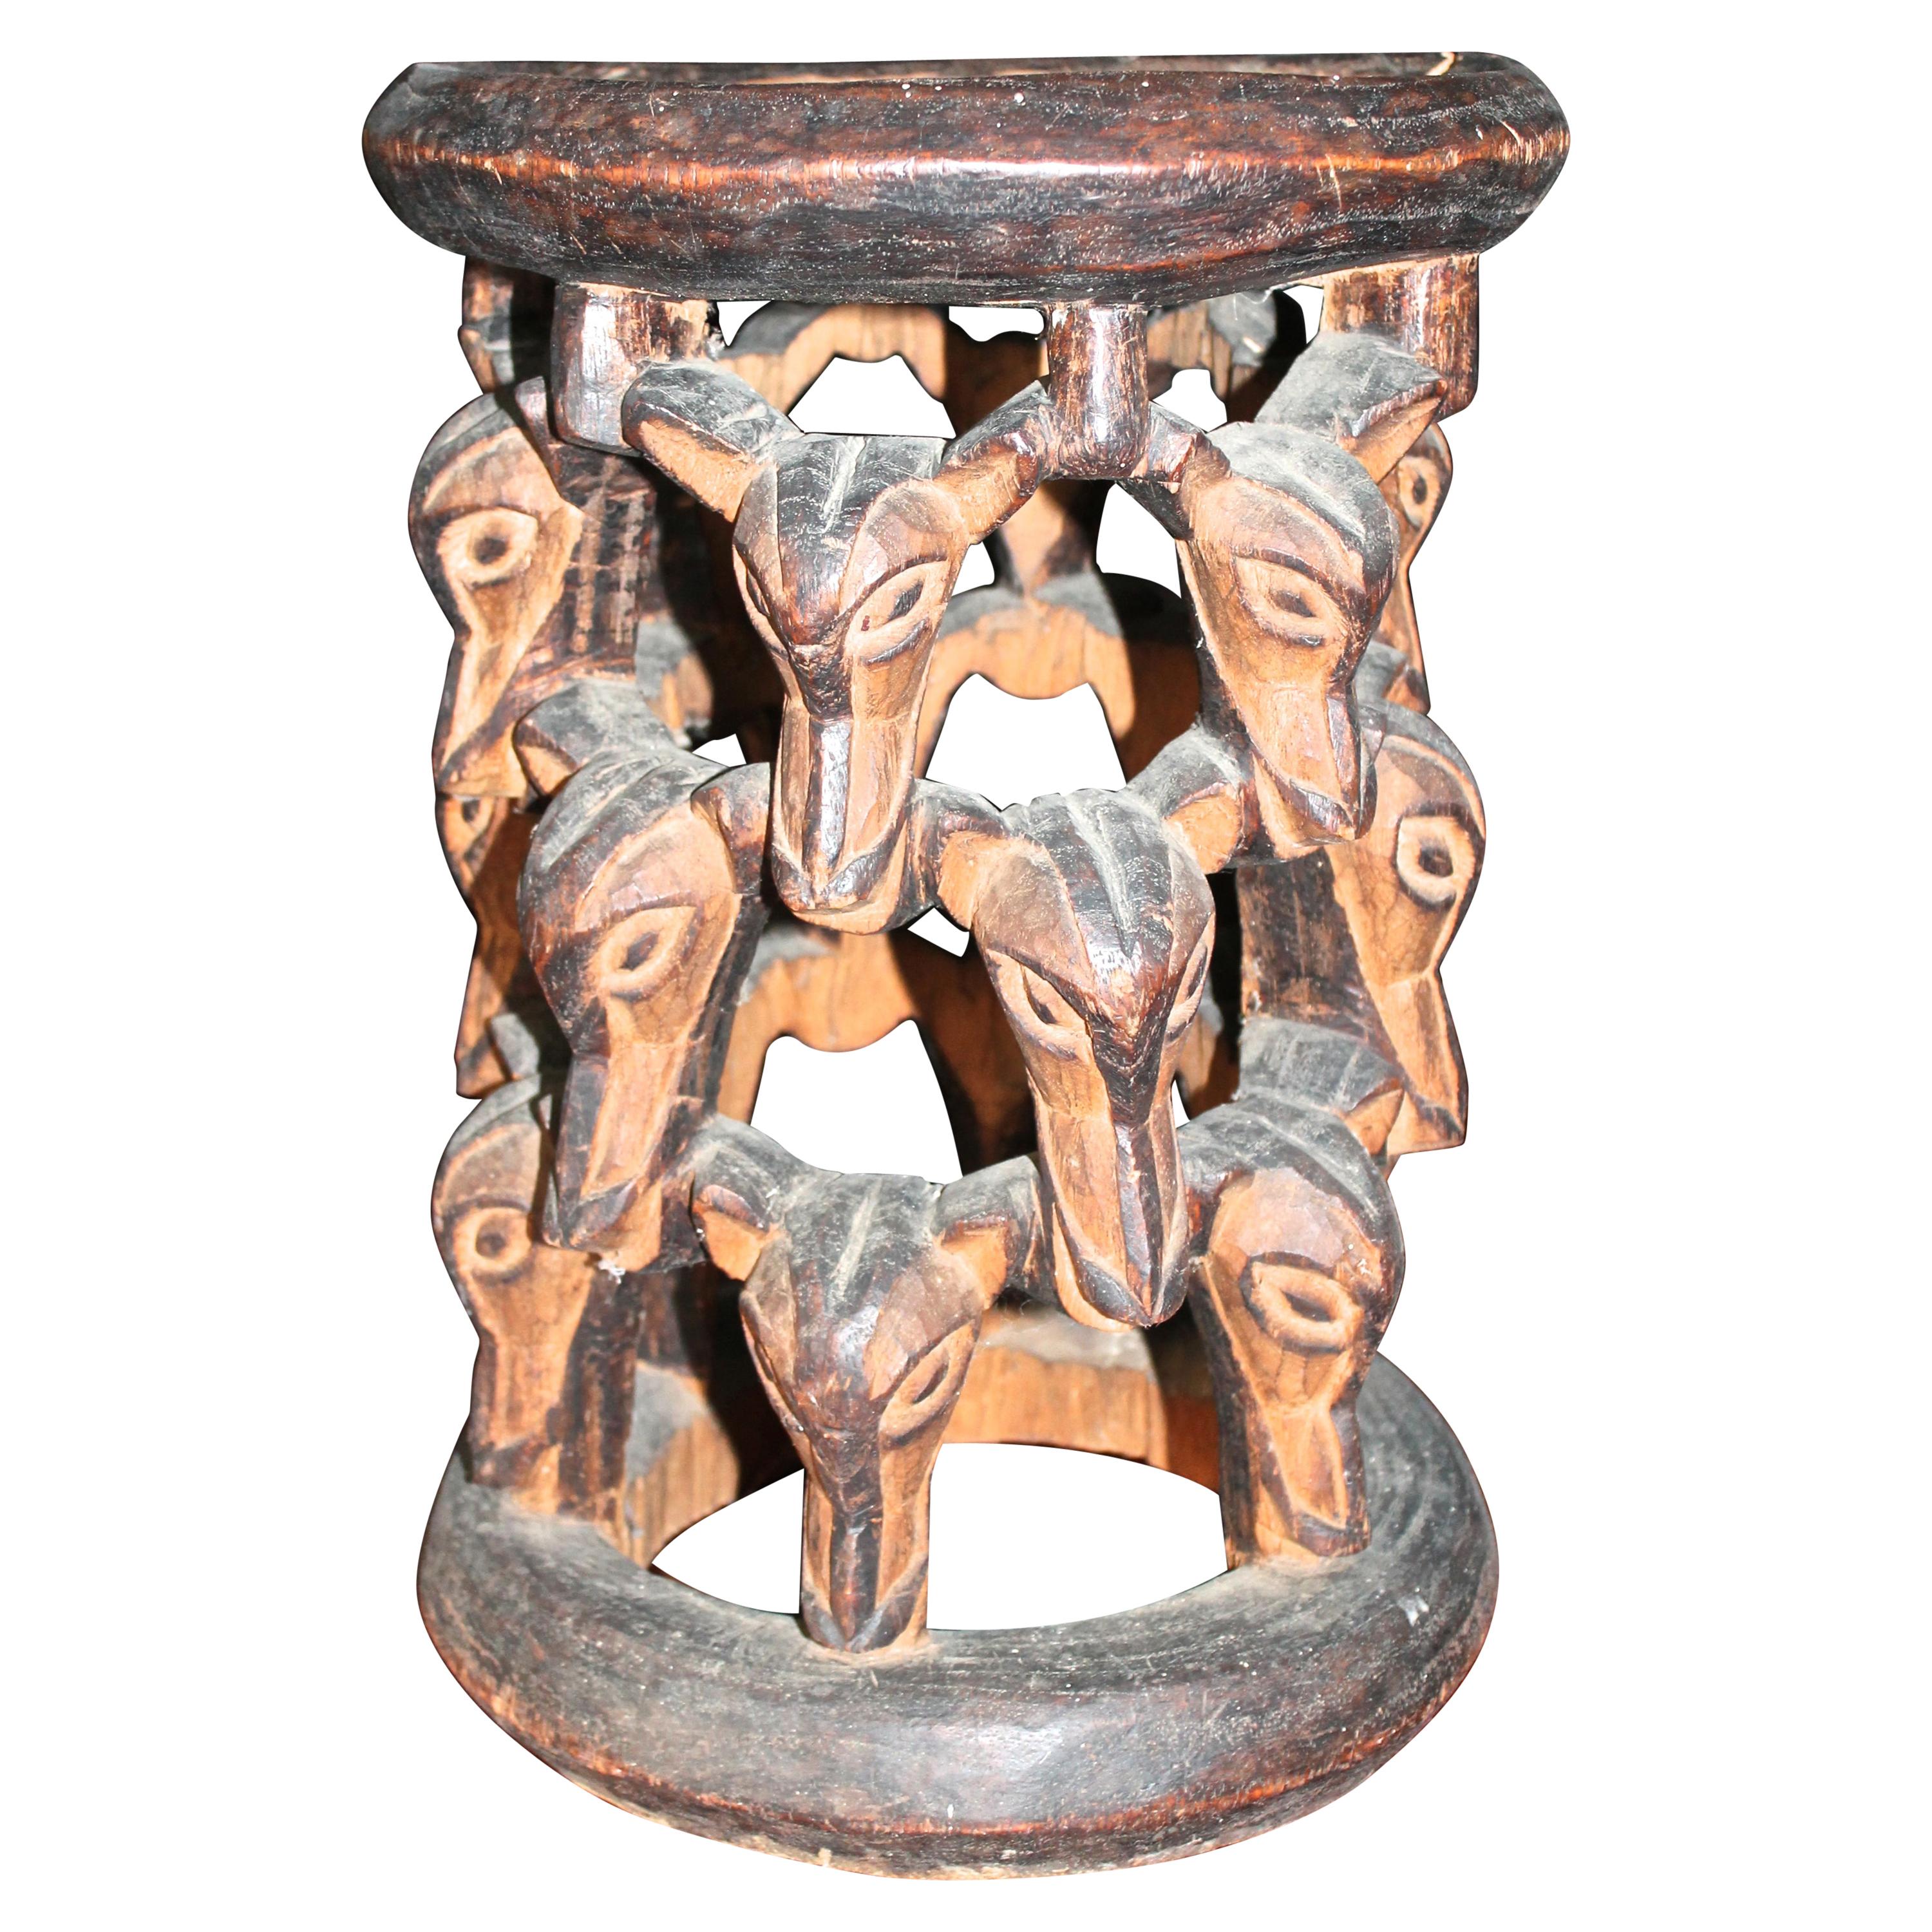 Cameroon "Bat" Stool African Sculpture For Sale